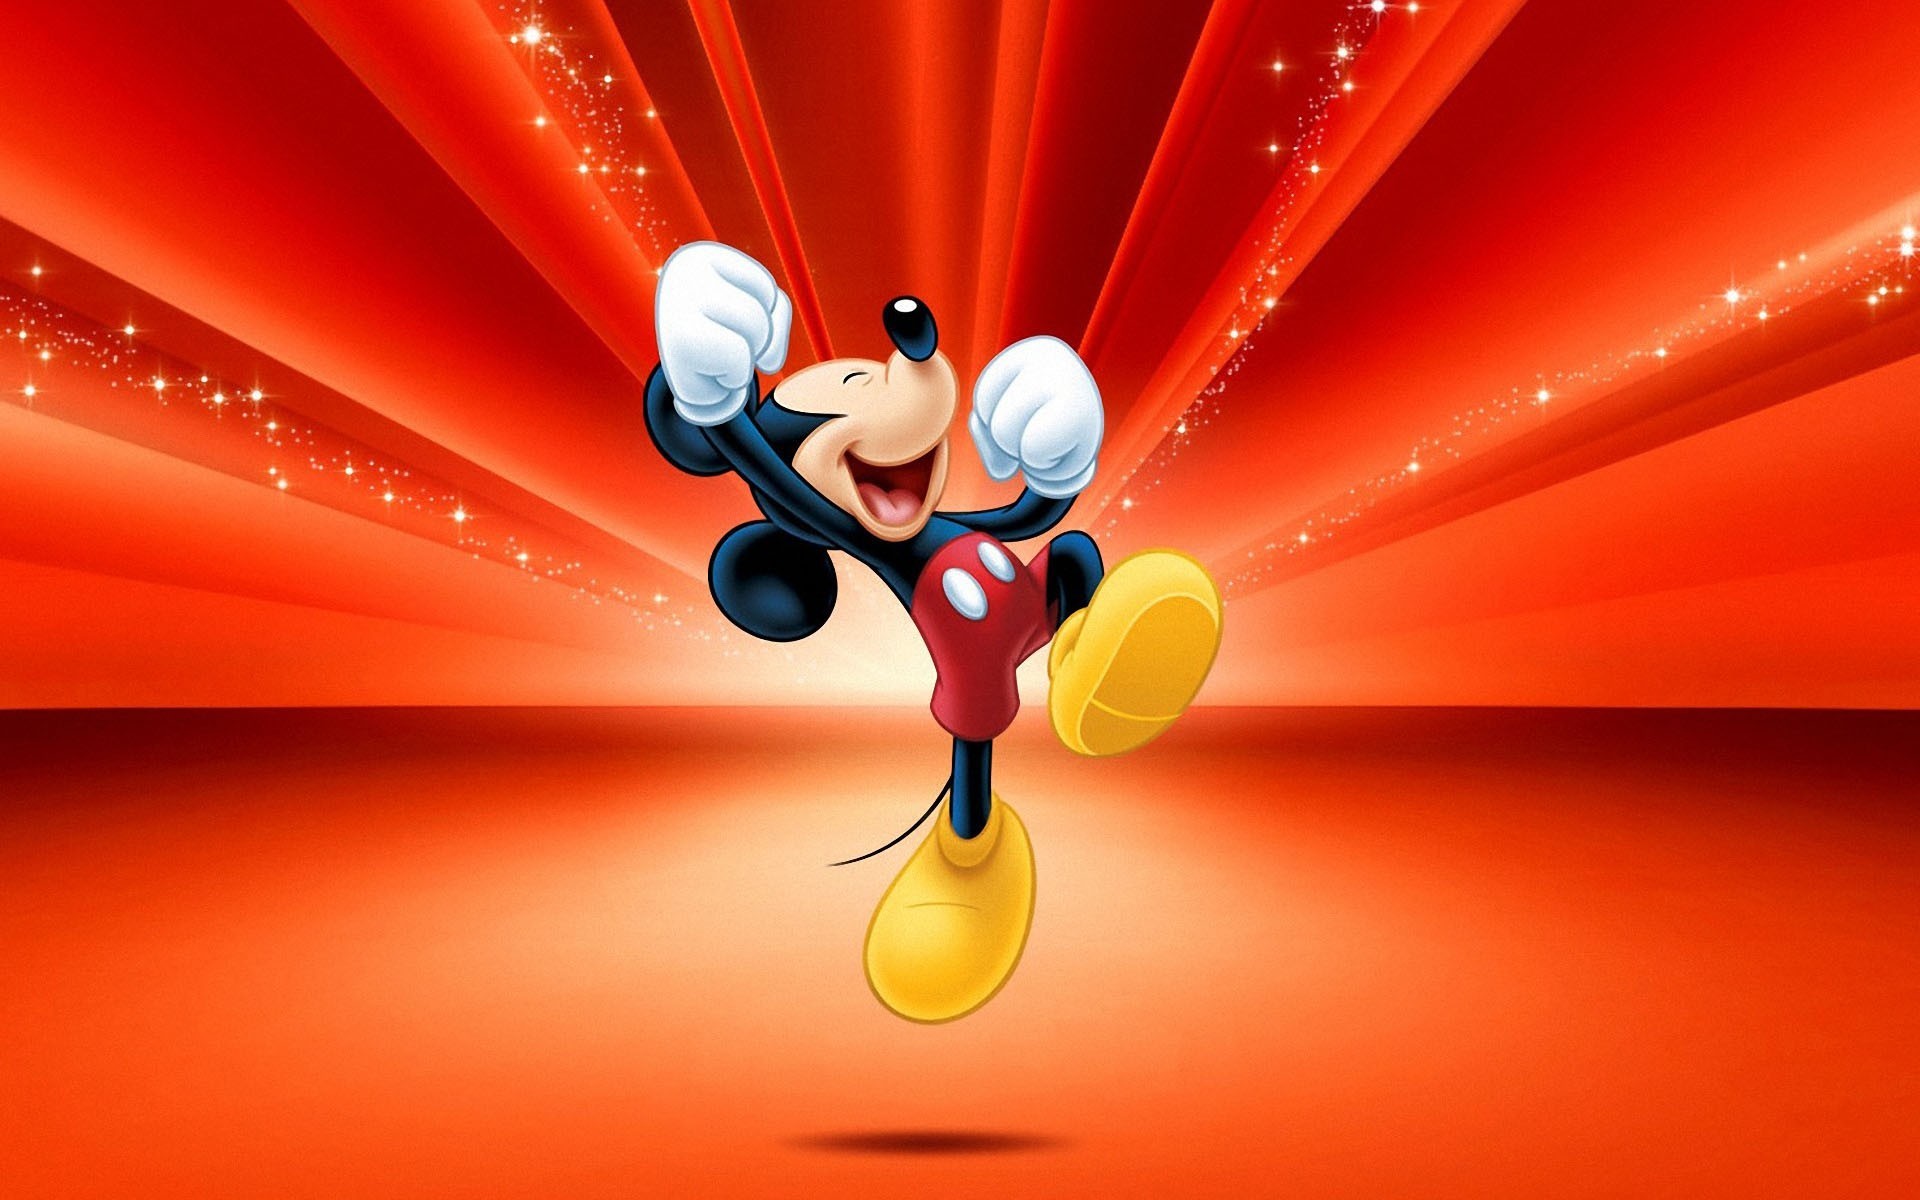 1920x1200 Cartoon Mickey Mouse Wallpaper for iPhone Free wallpaper download .